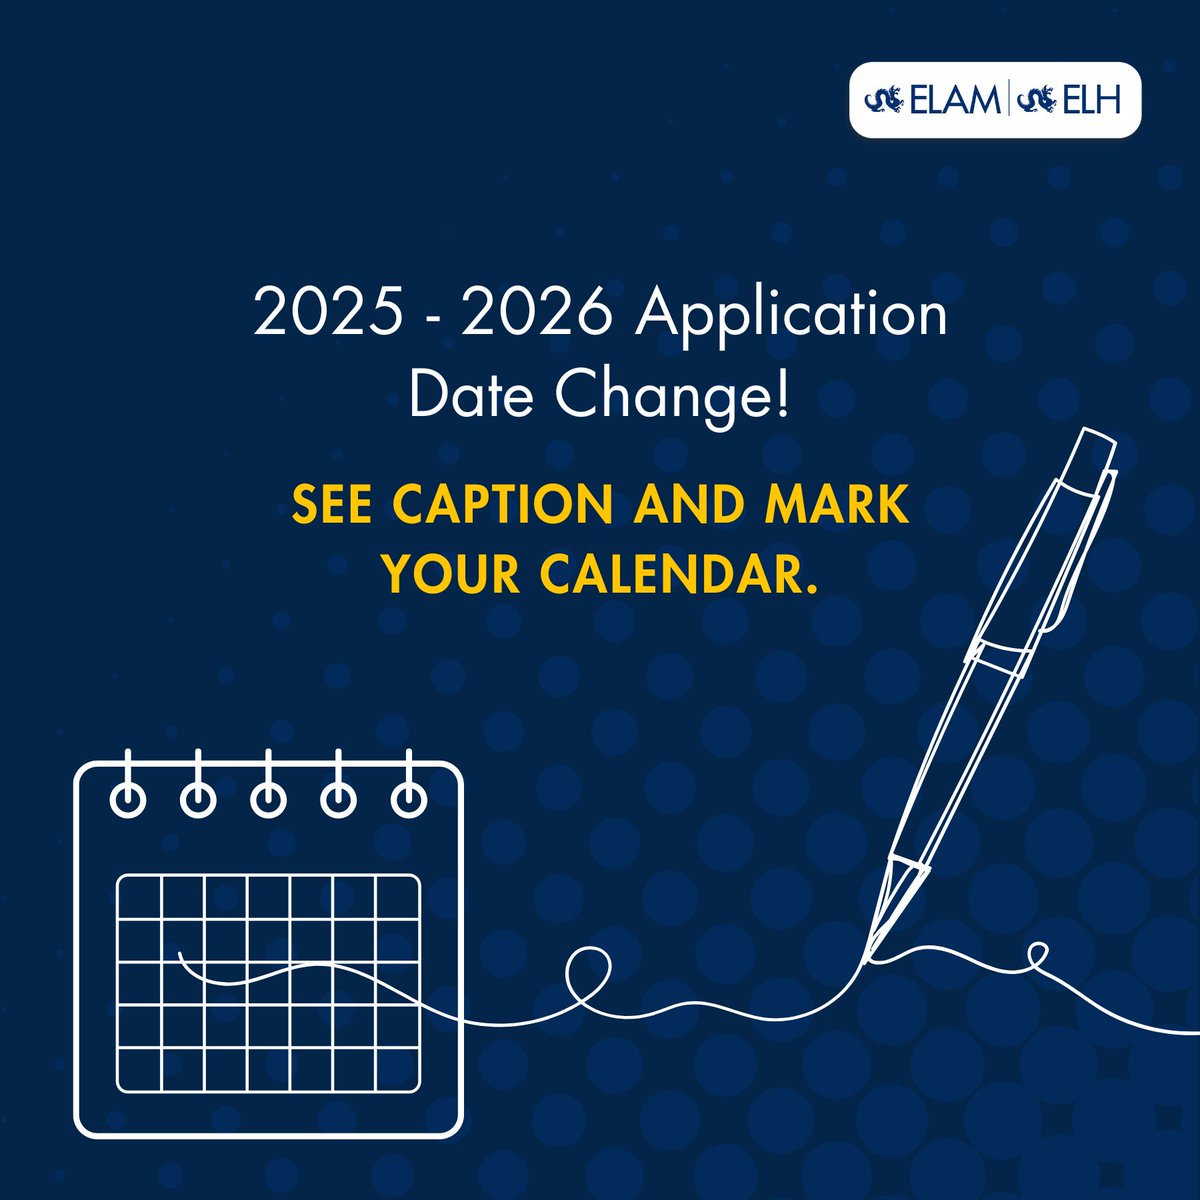 The application for the 2025 - 2026 year for both programs opens 9/1/24. Please note this new, earlier date. Application closes on 10/31/24, at 11:59 p.m. ET, and letters of nomination and recommendation are due by 11/18/24. More details at the link: tinyurl.com/2dczh2nv